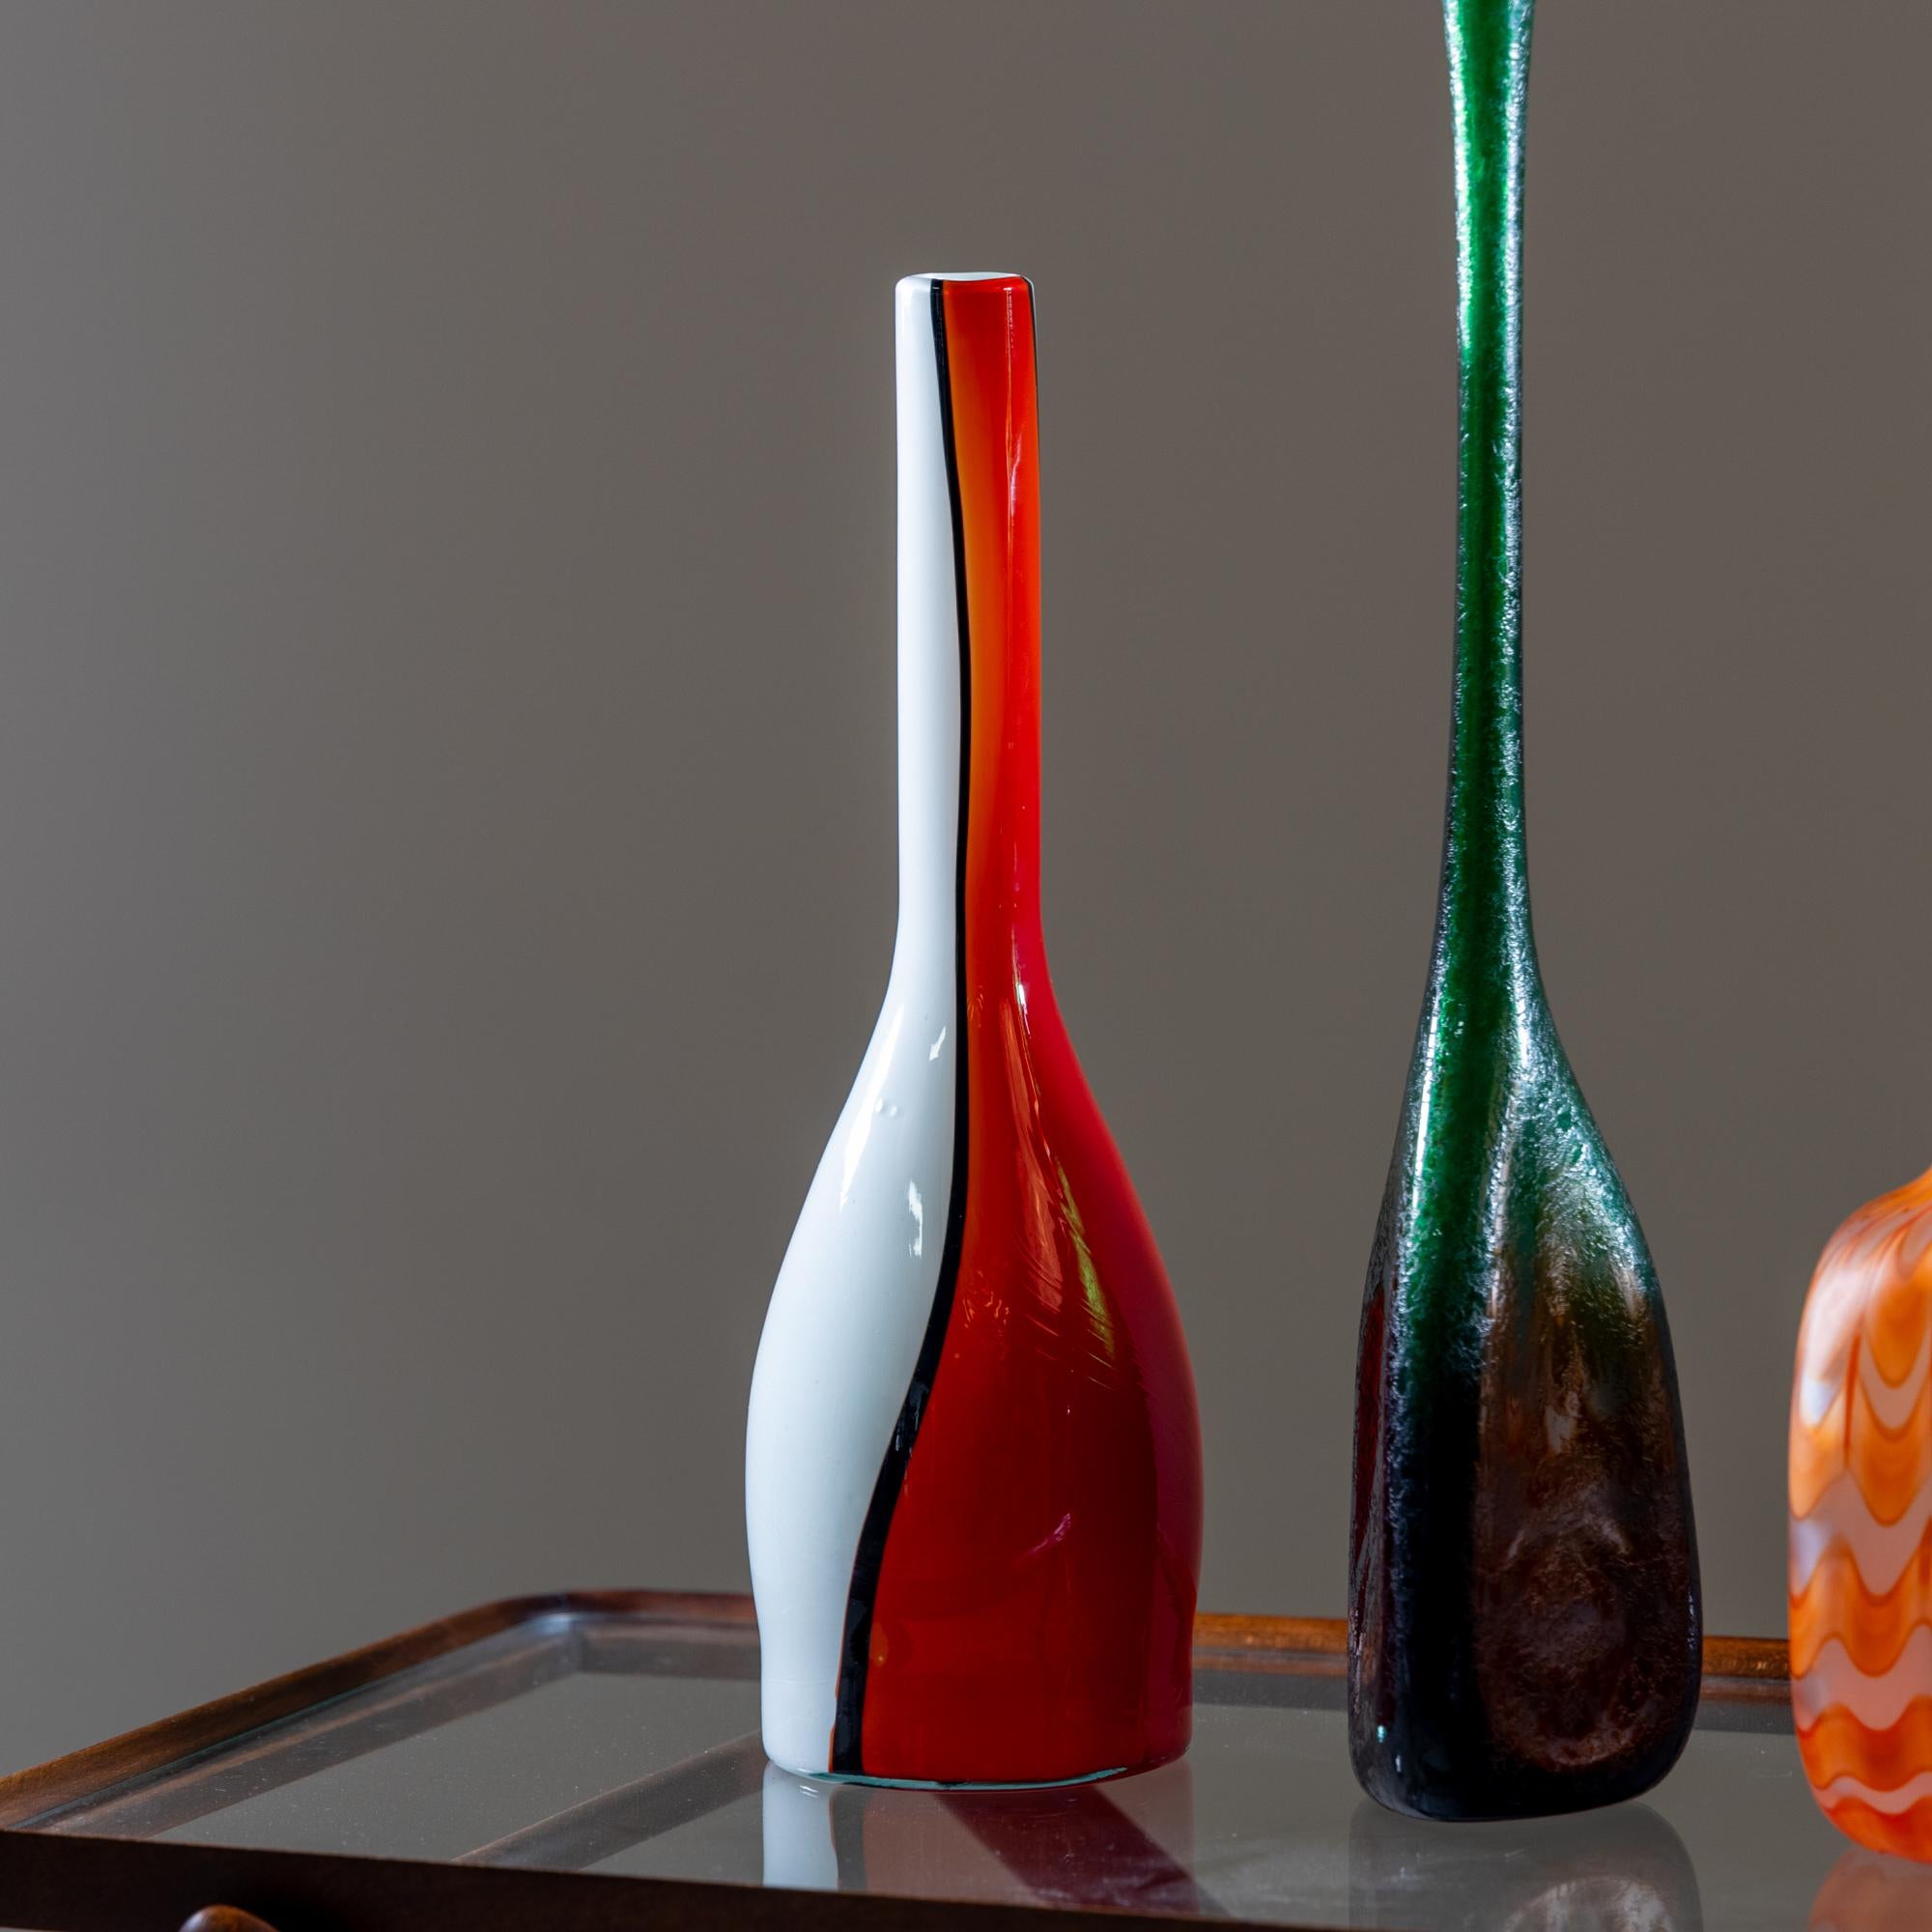 Three Italian vases made of glass in red and orange (Murano) and green (Seguso) with different decorations and basic shapes.